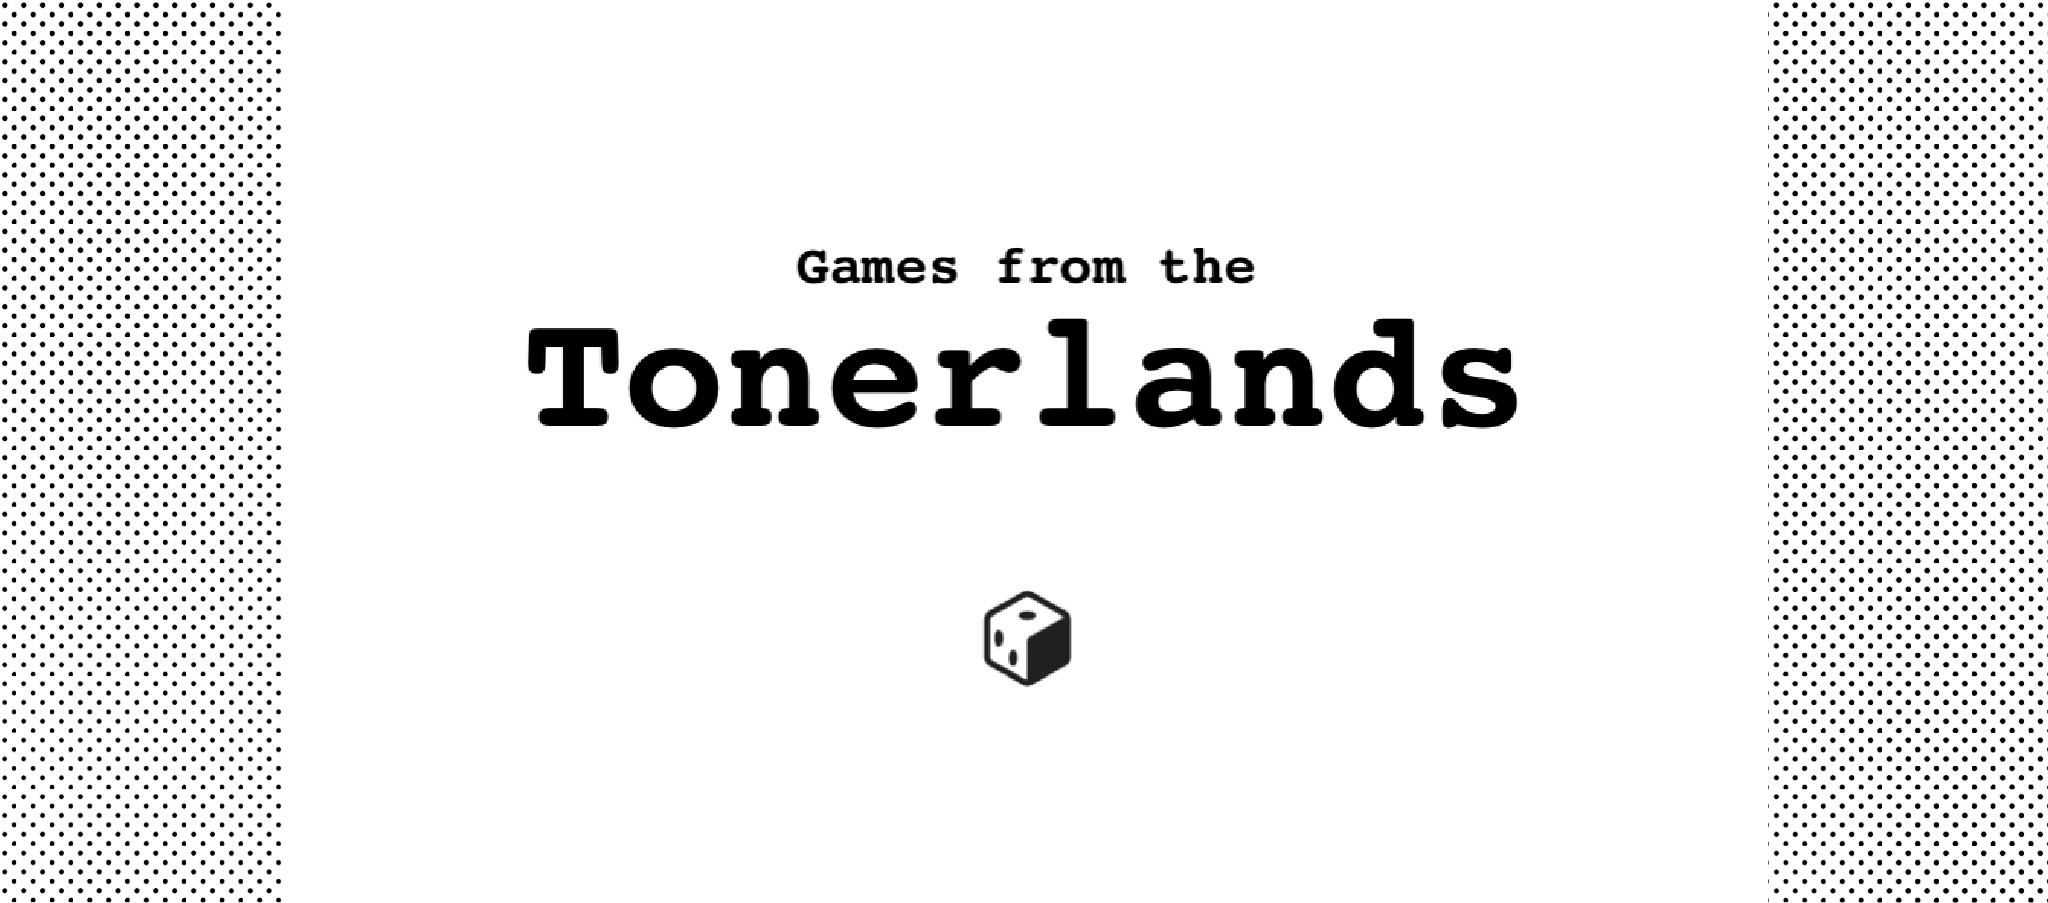 Games from the Tonerlands